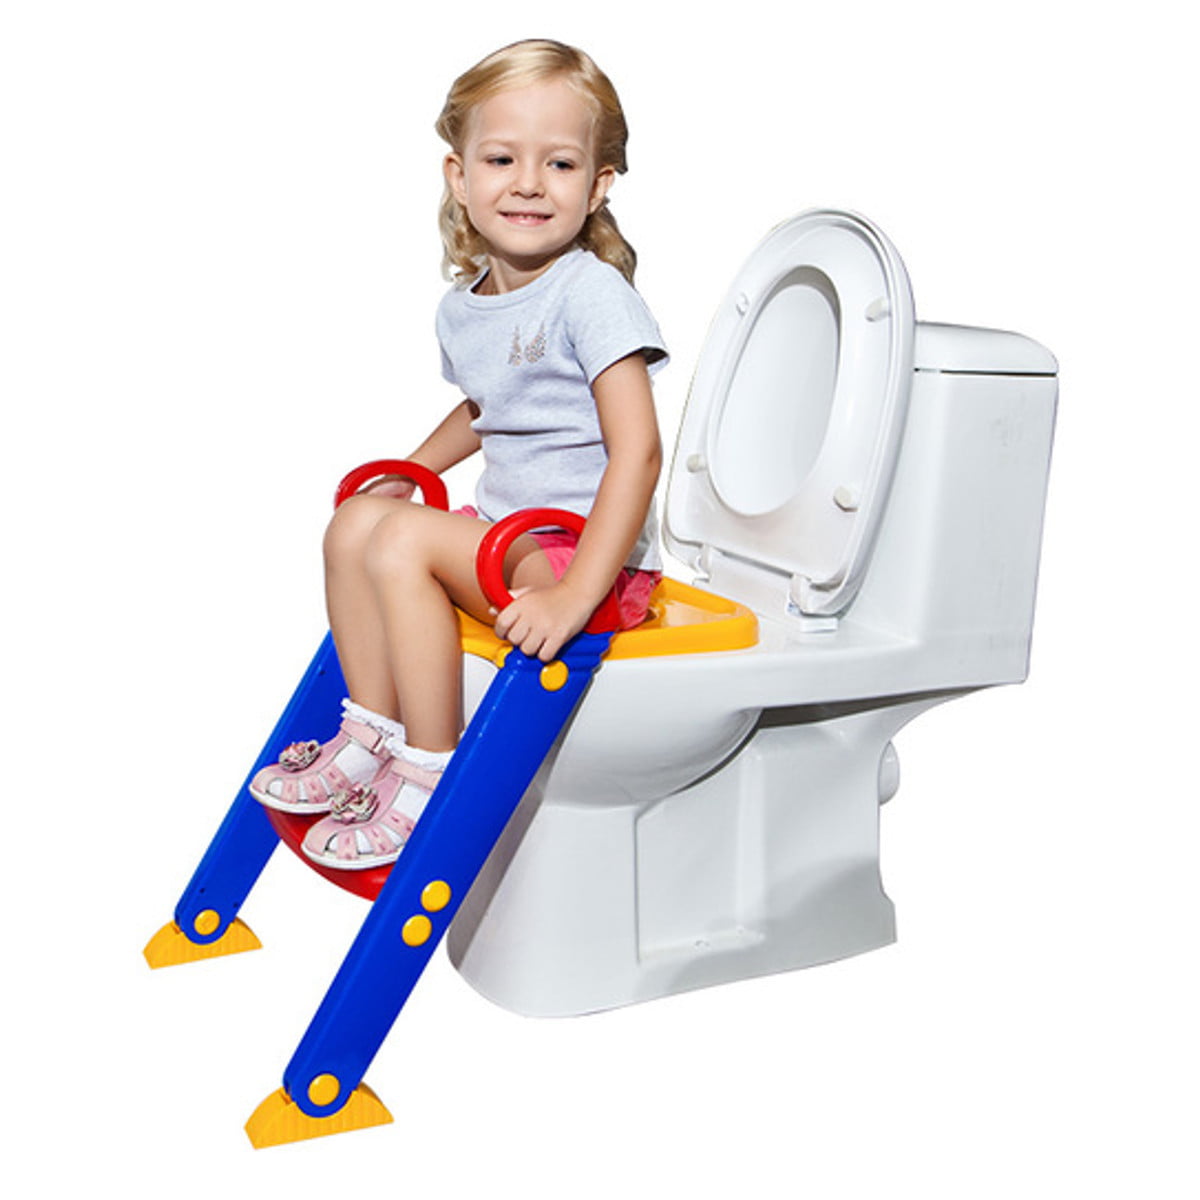 Toddlers and ChildrenPotty Step Stools Potty & Toilet Training for Babies